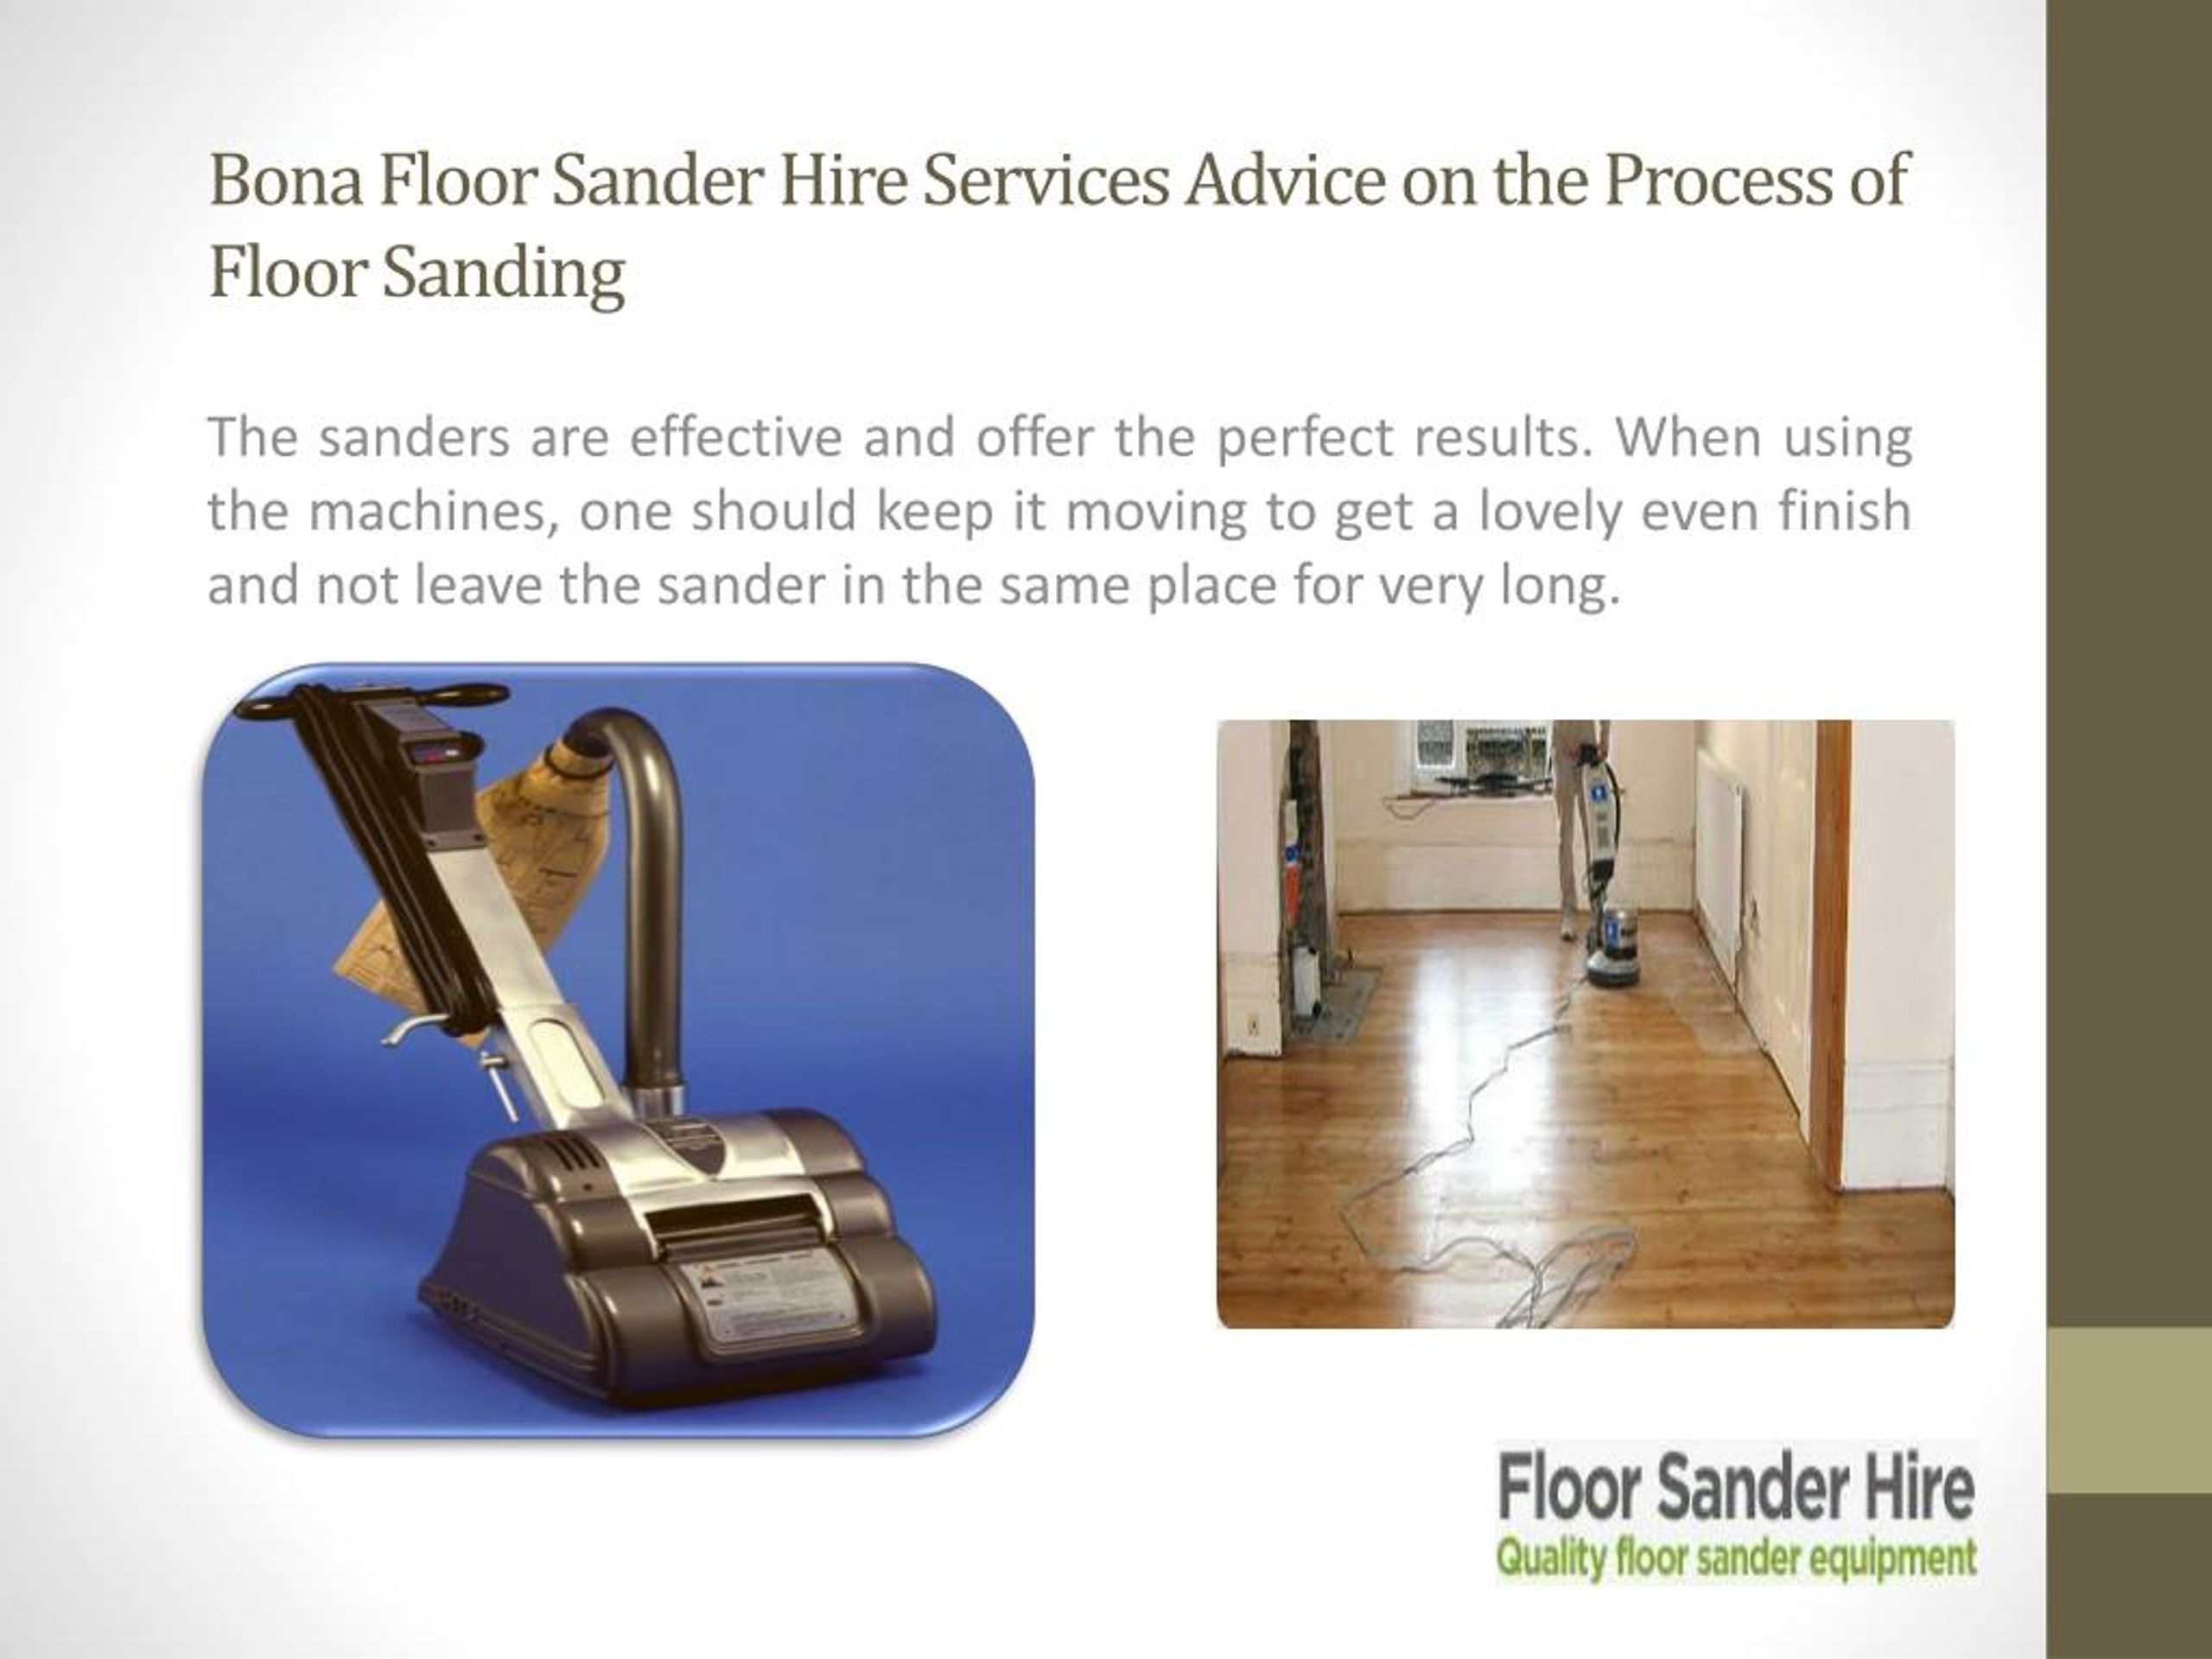 Ppt Bona Floor Sander Hire Services Advice On The Process Of